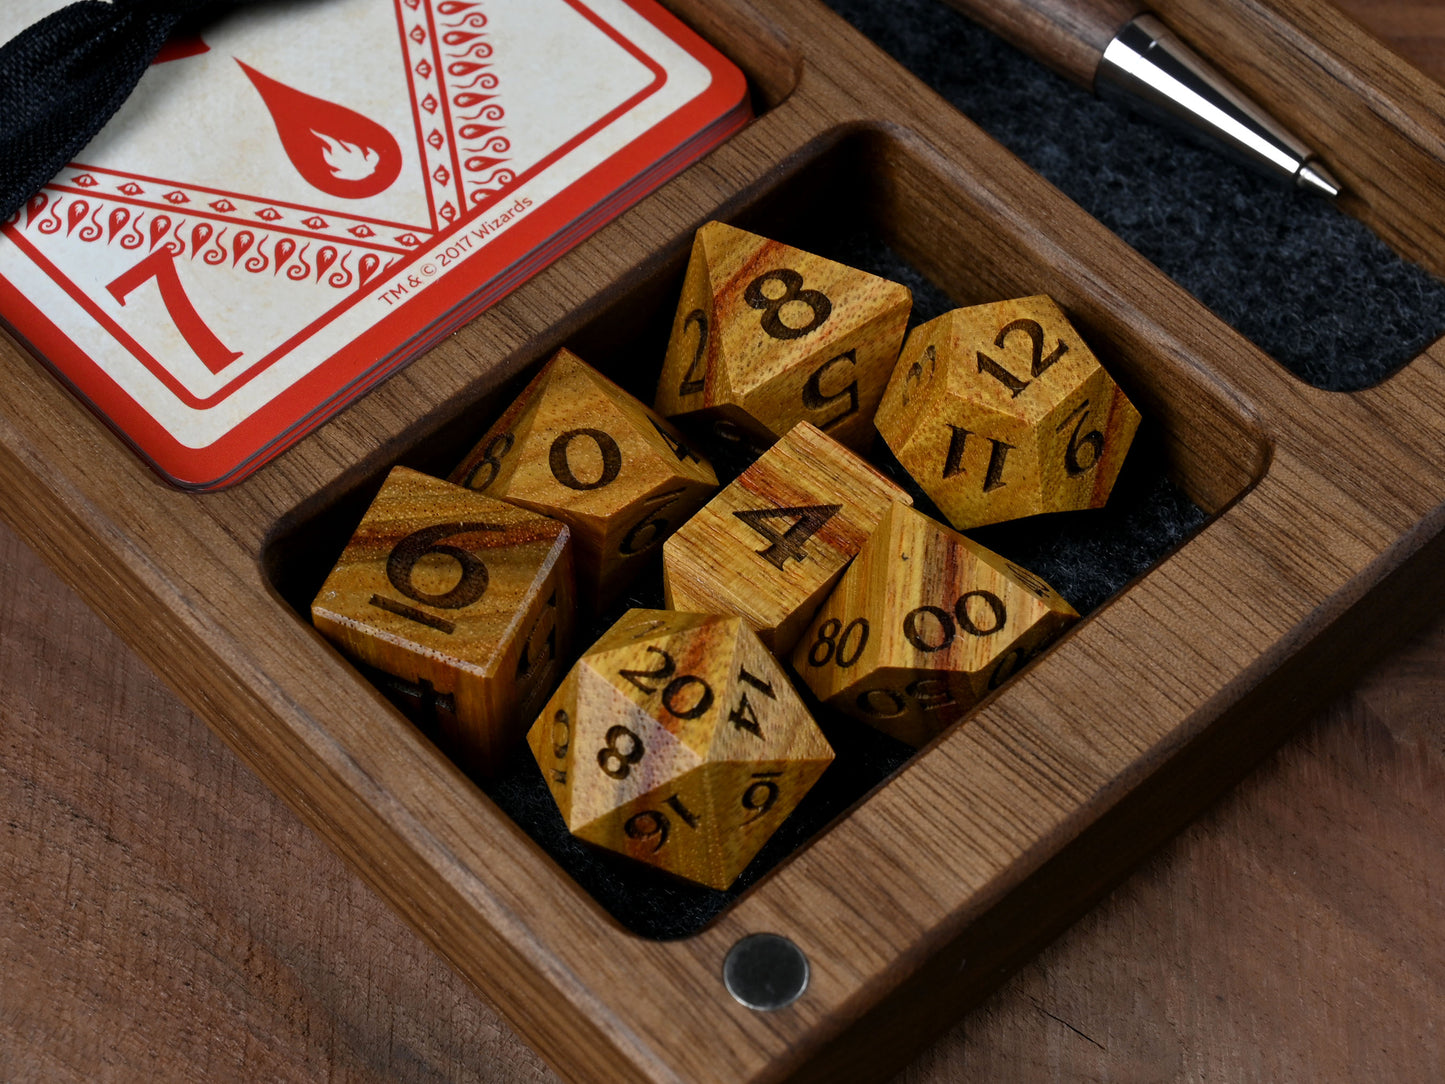 Canarywood polyhedral dice set, dnd dice, rpg dice for dungeons and dragons.